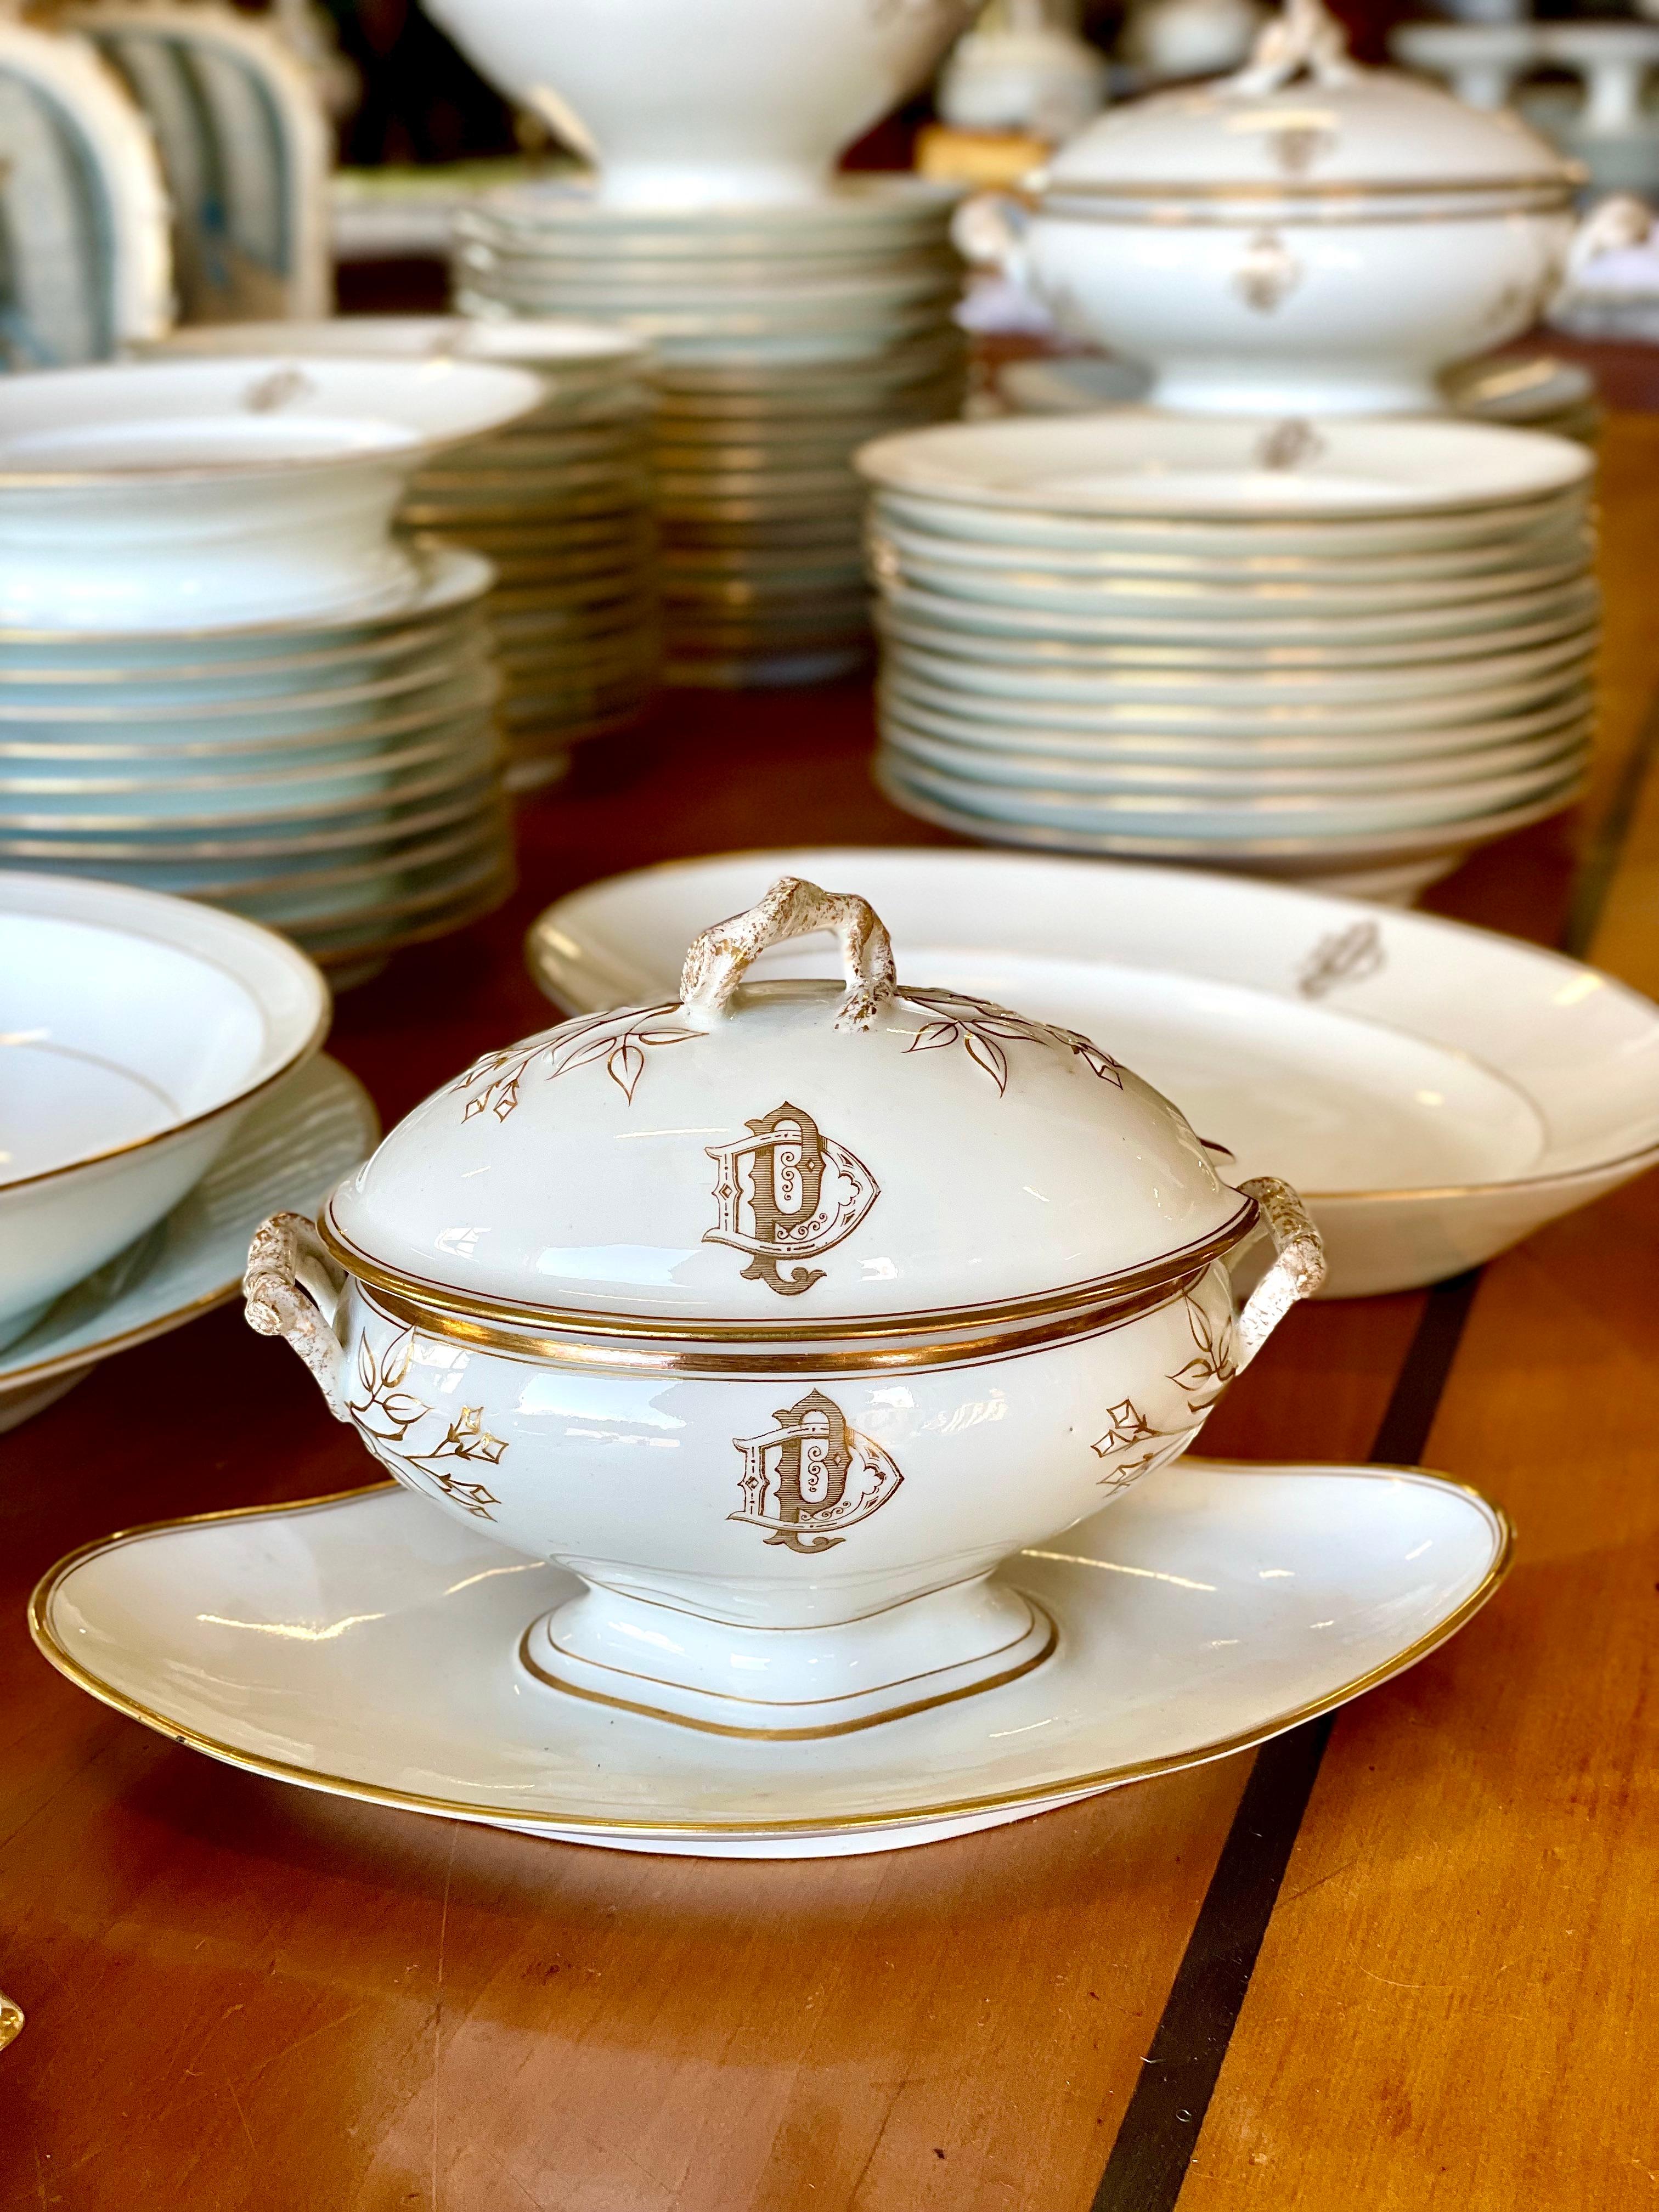 19th Century Limoges Porcelain Set of 50 Piece Dinner Service with Gilt Edges and Monogramme For Sale